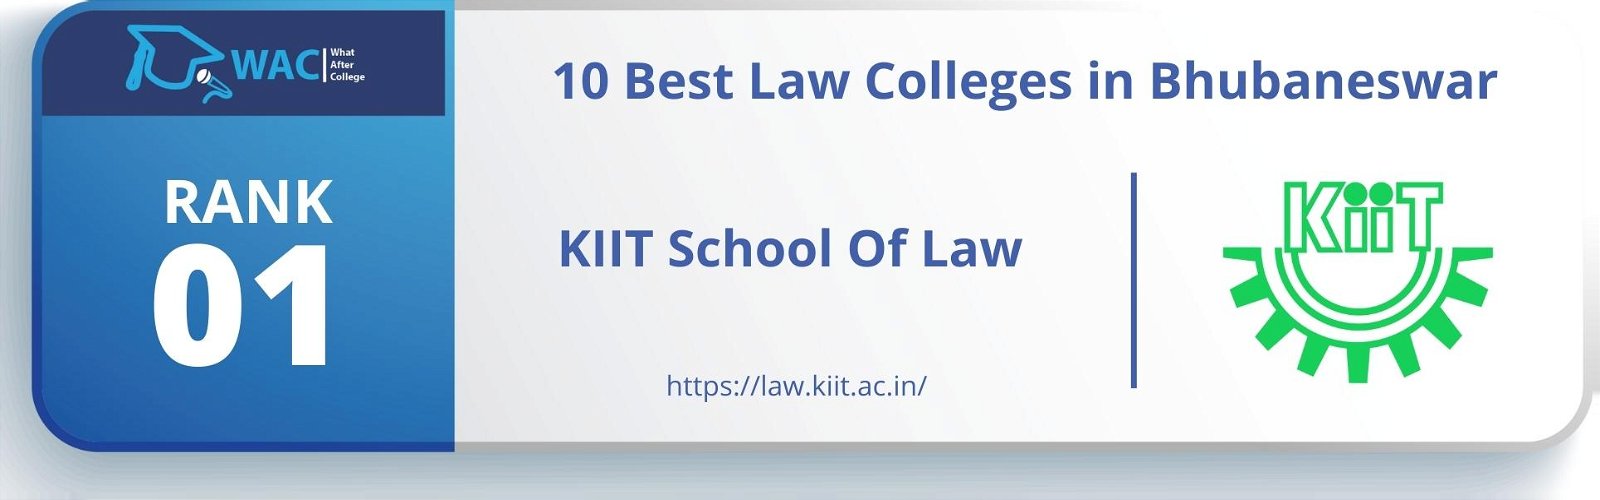 Law Colleges in Bhubaneswar